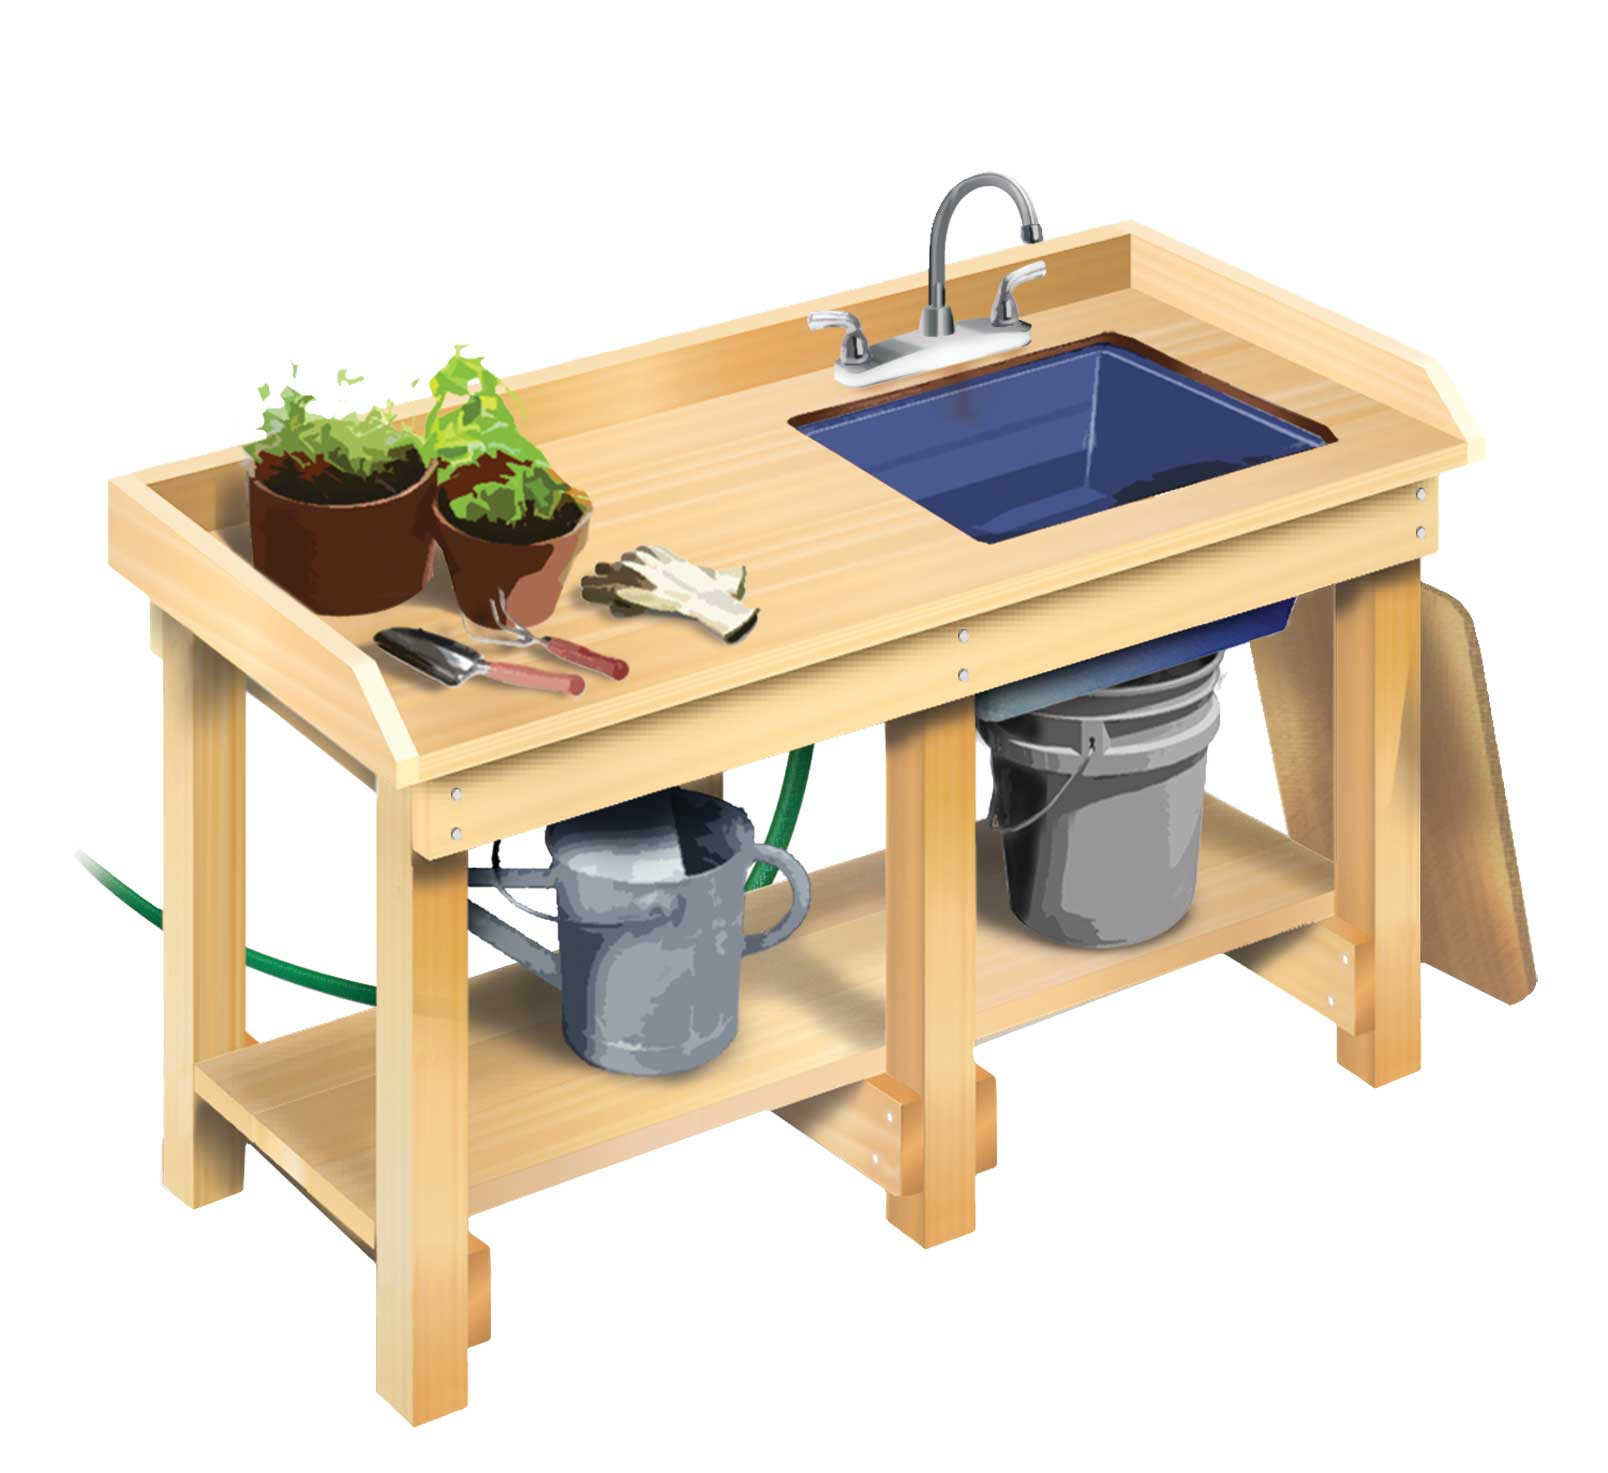 Workbench Plans DIY
 How to Build a Workbench DIY MOTHER EARTH NEWS